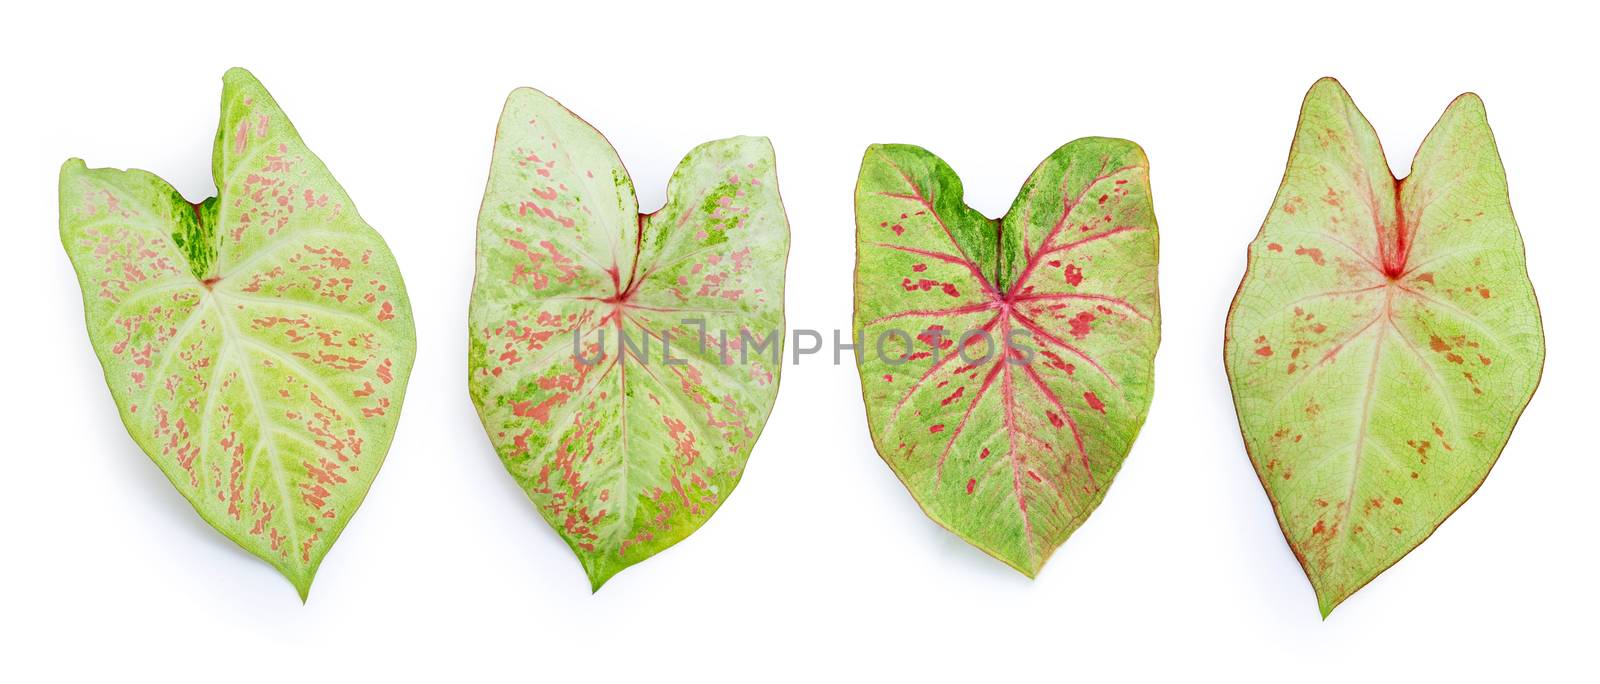 Caladium leaves on white background. Top view by Bowonpat